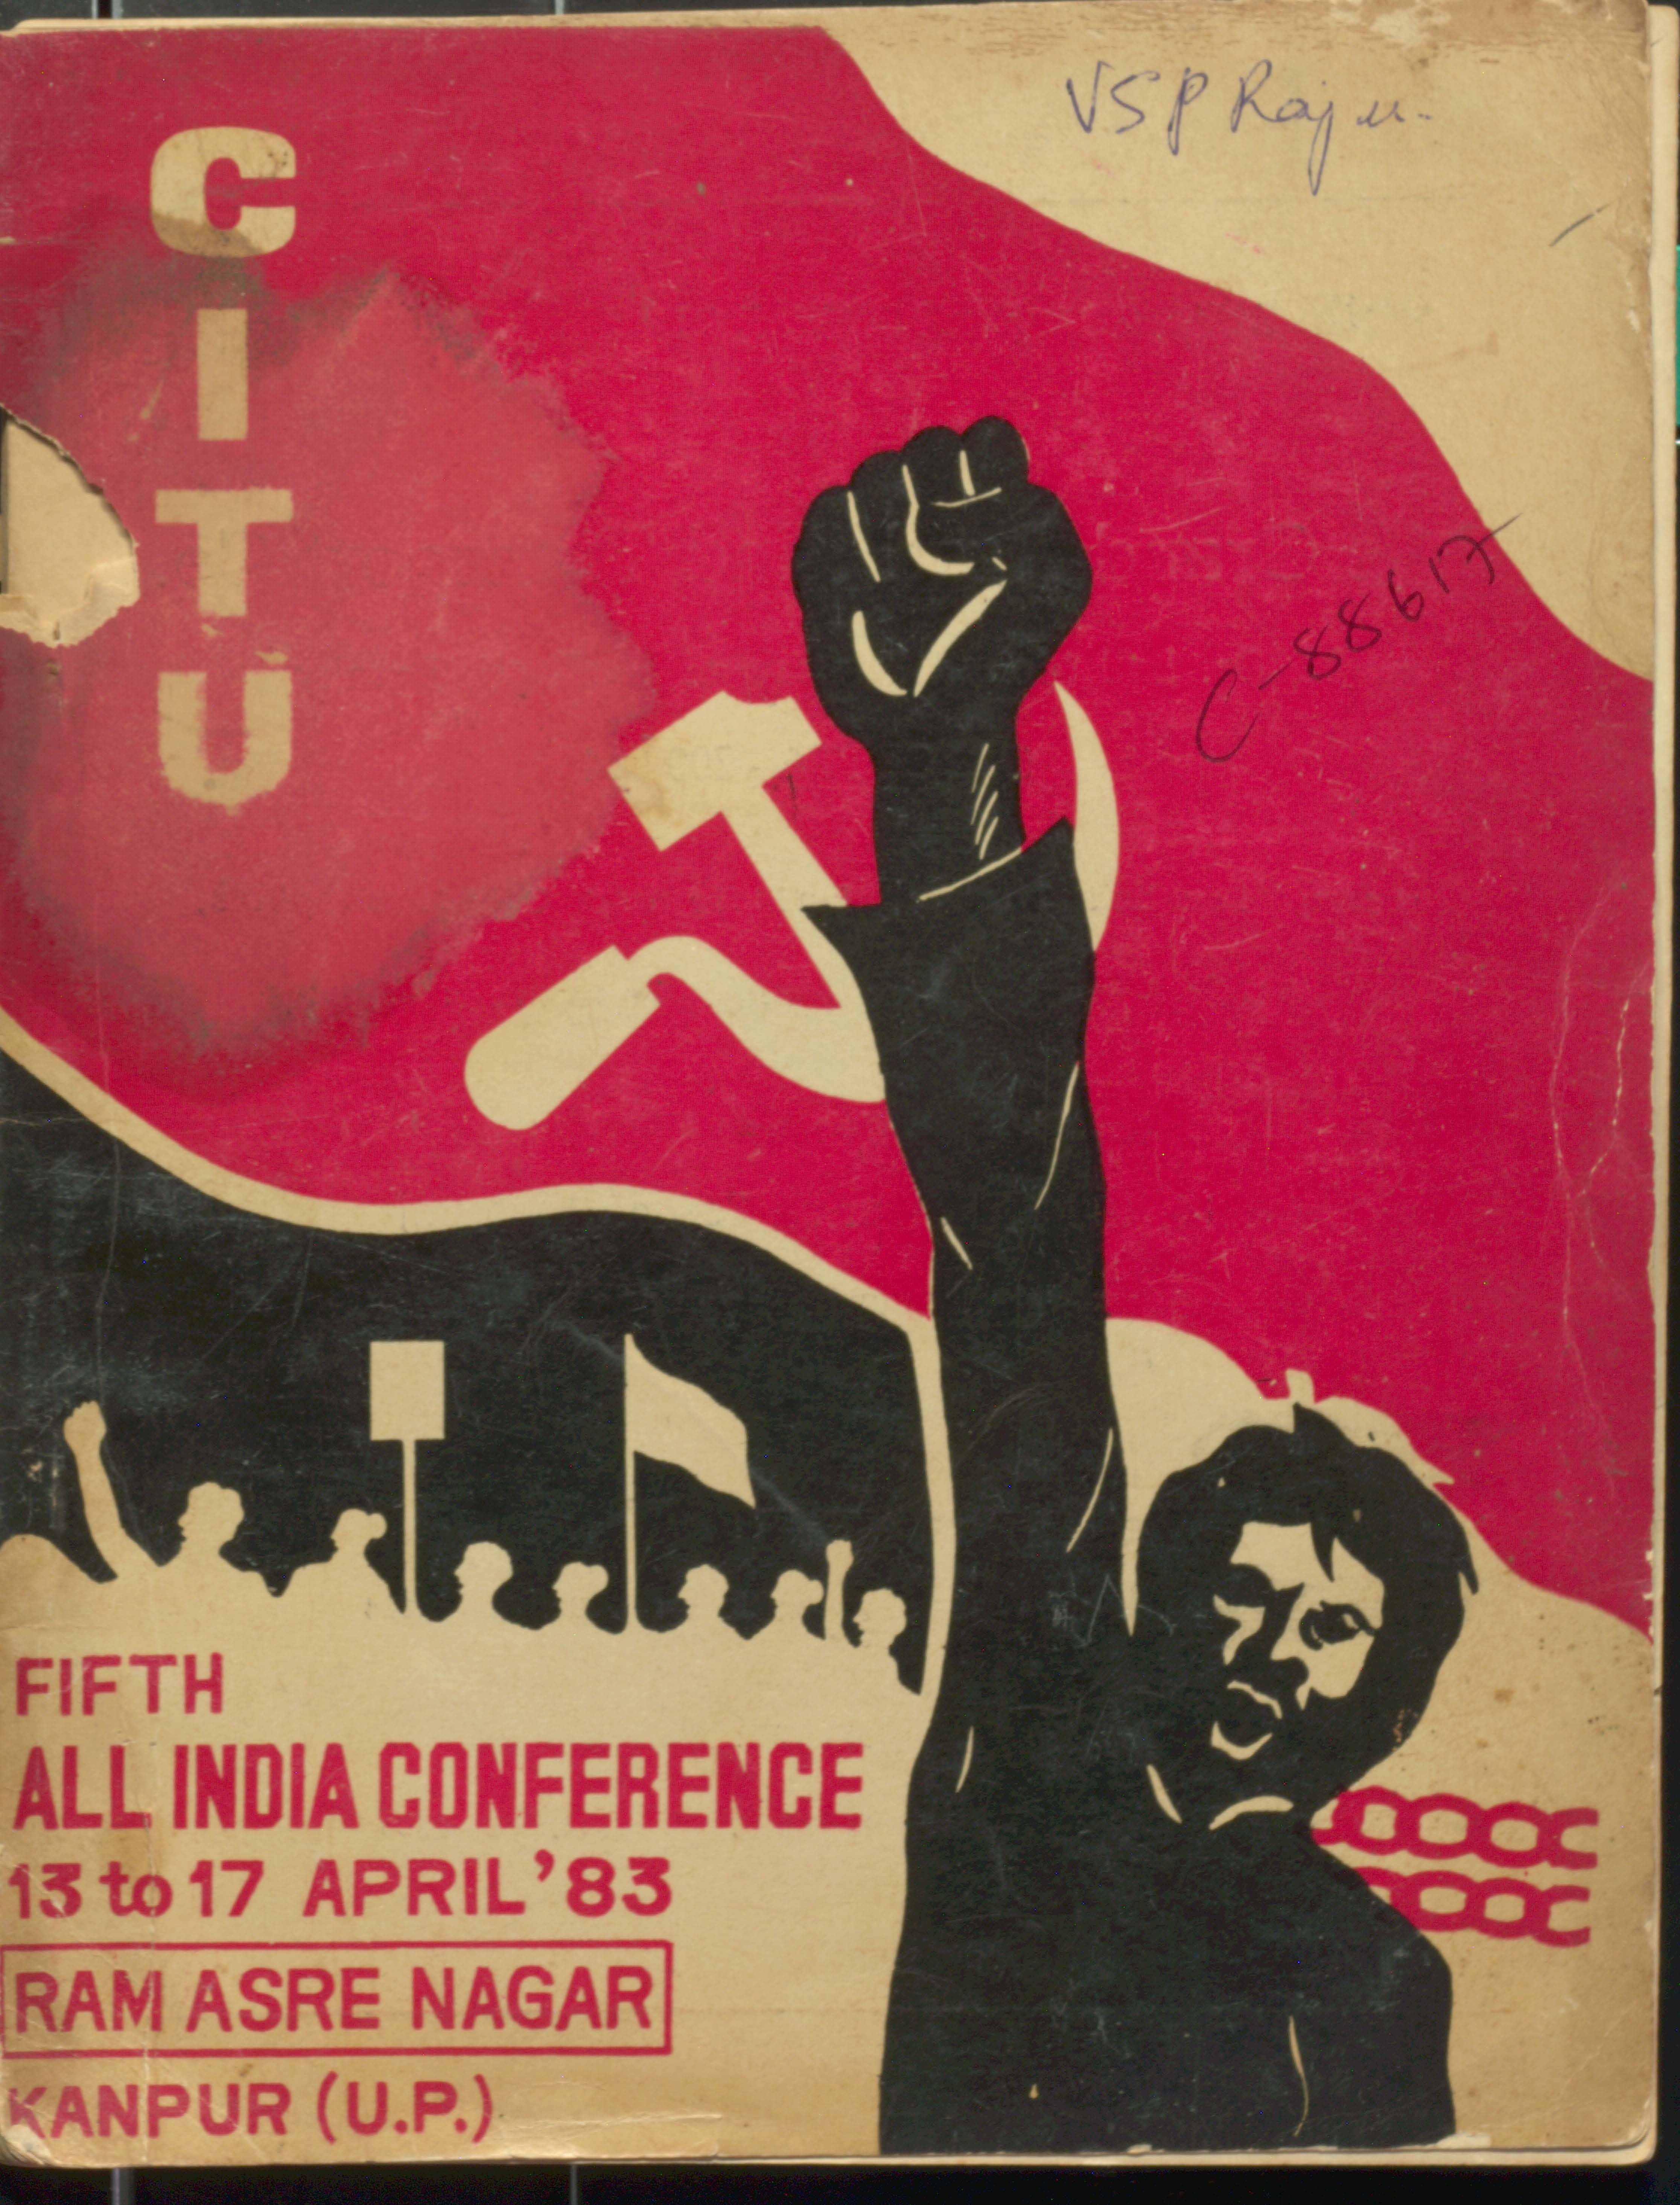 Citu Fifth  All India Conference 13 to 17 Aprile'83